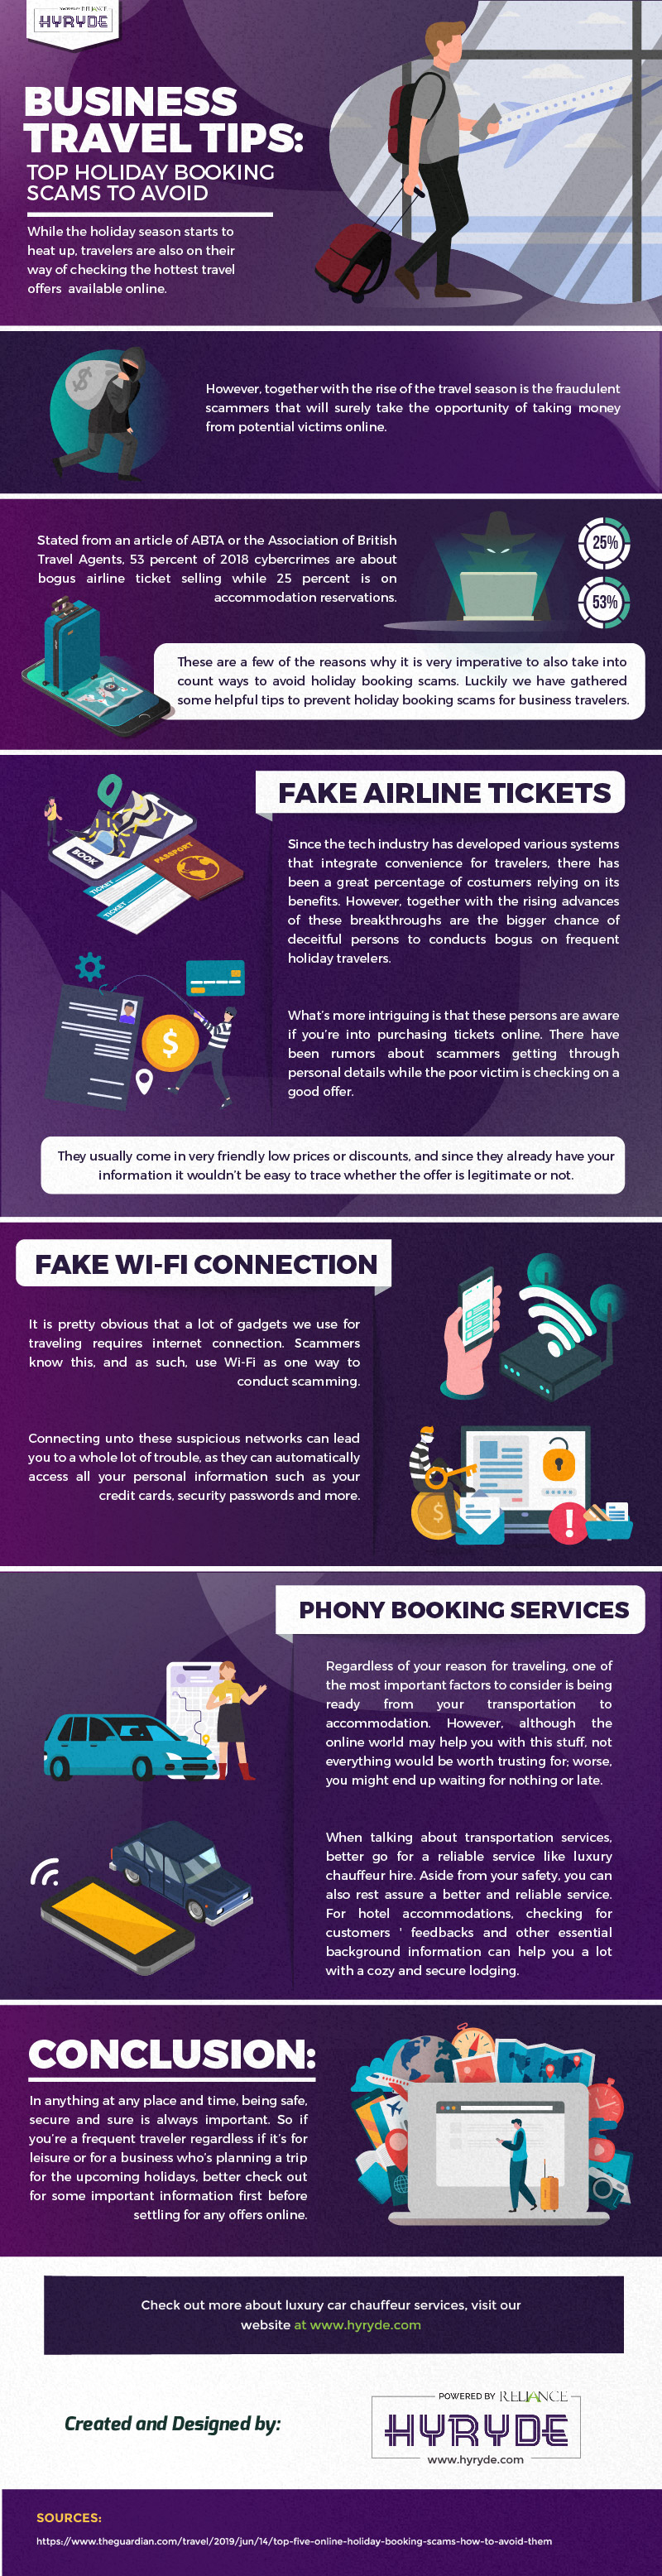 Business Travel Tips - Top Holiday Booking Scams to Avoid